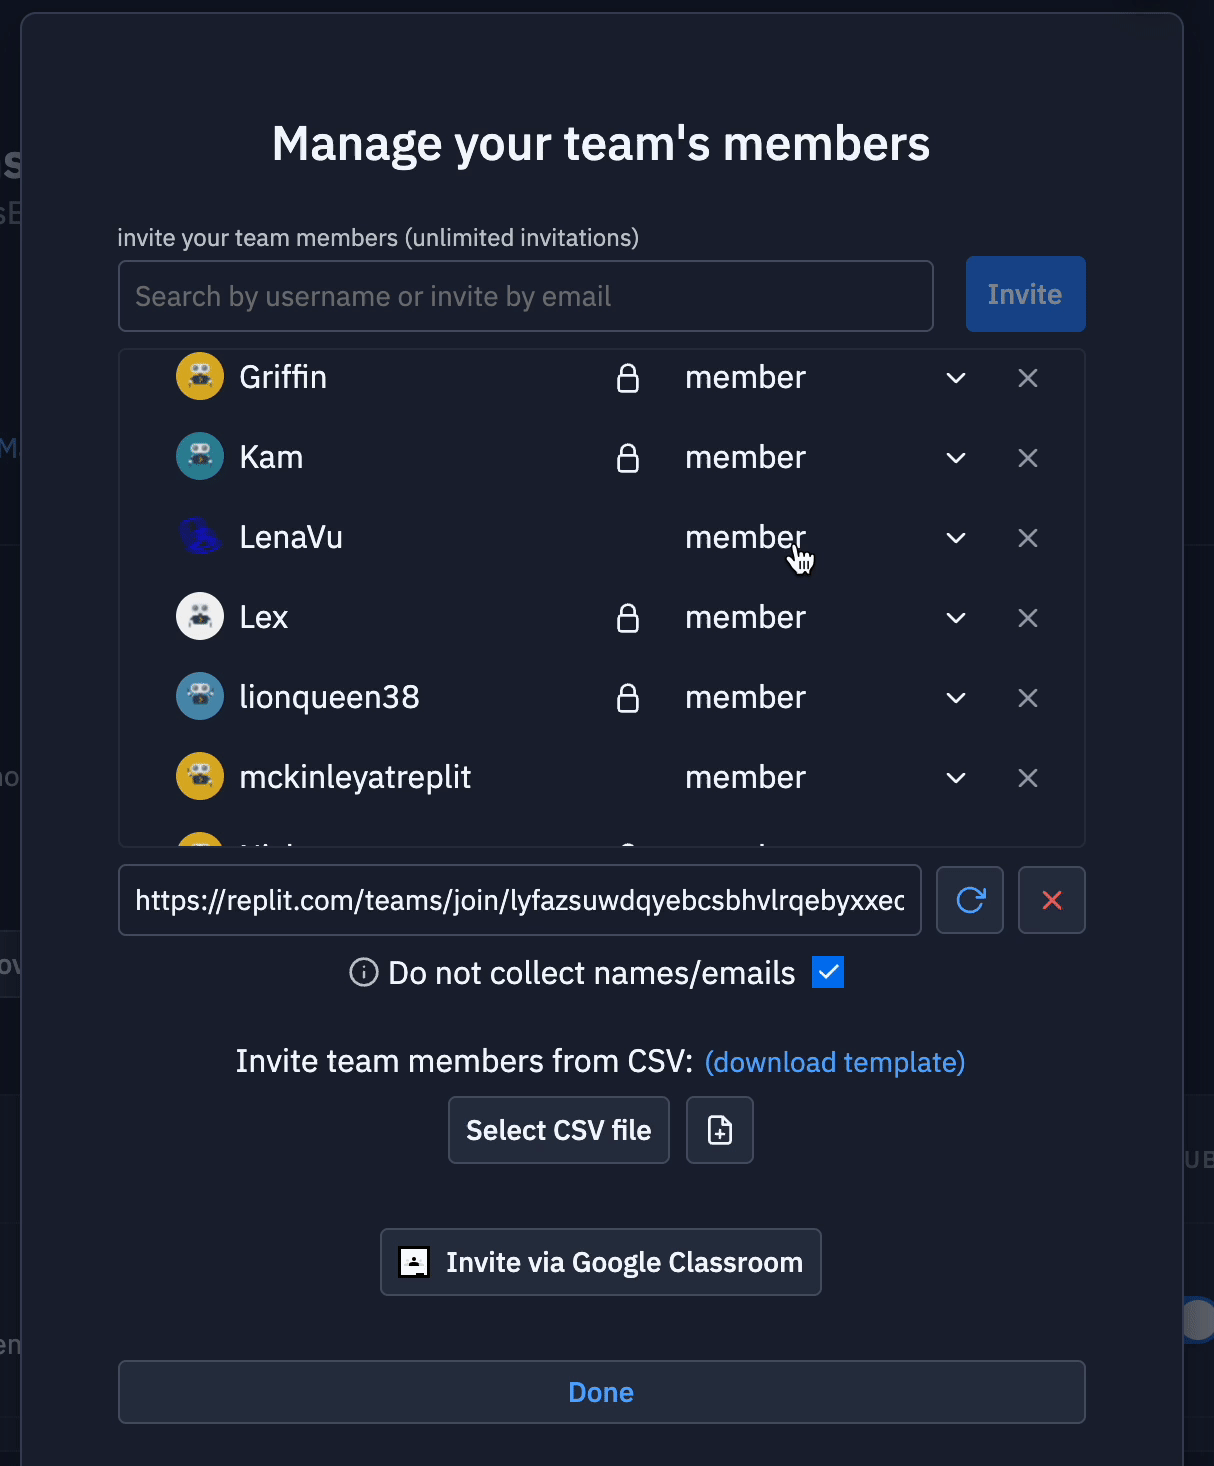 Changing a user role to team admin